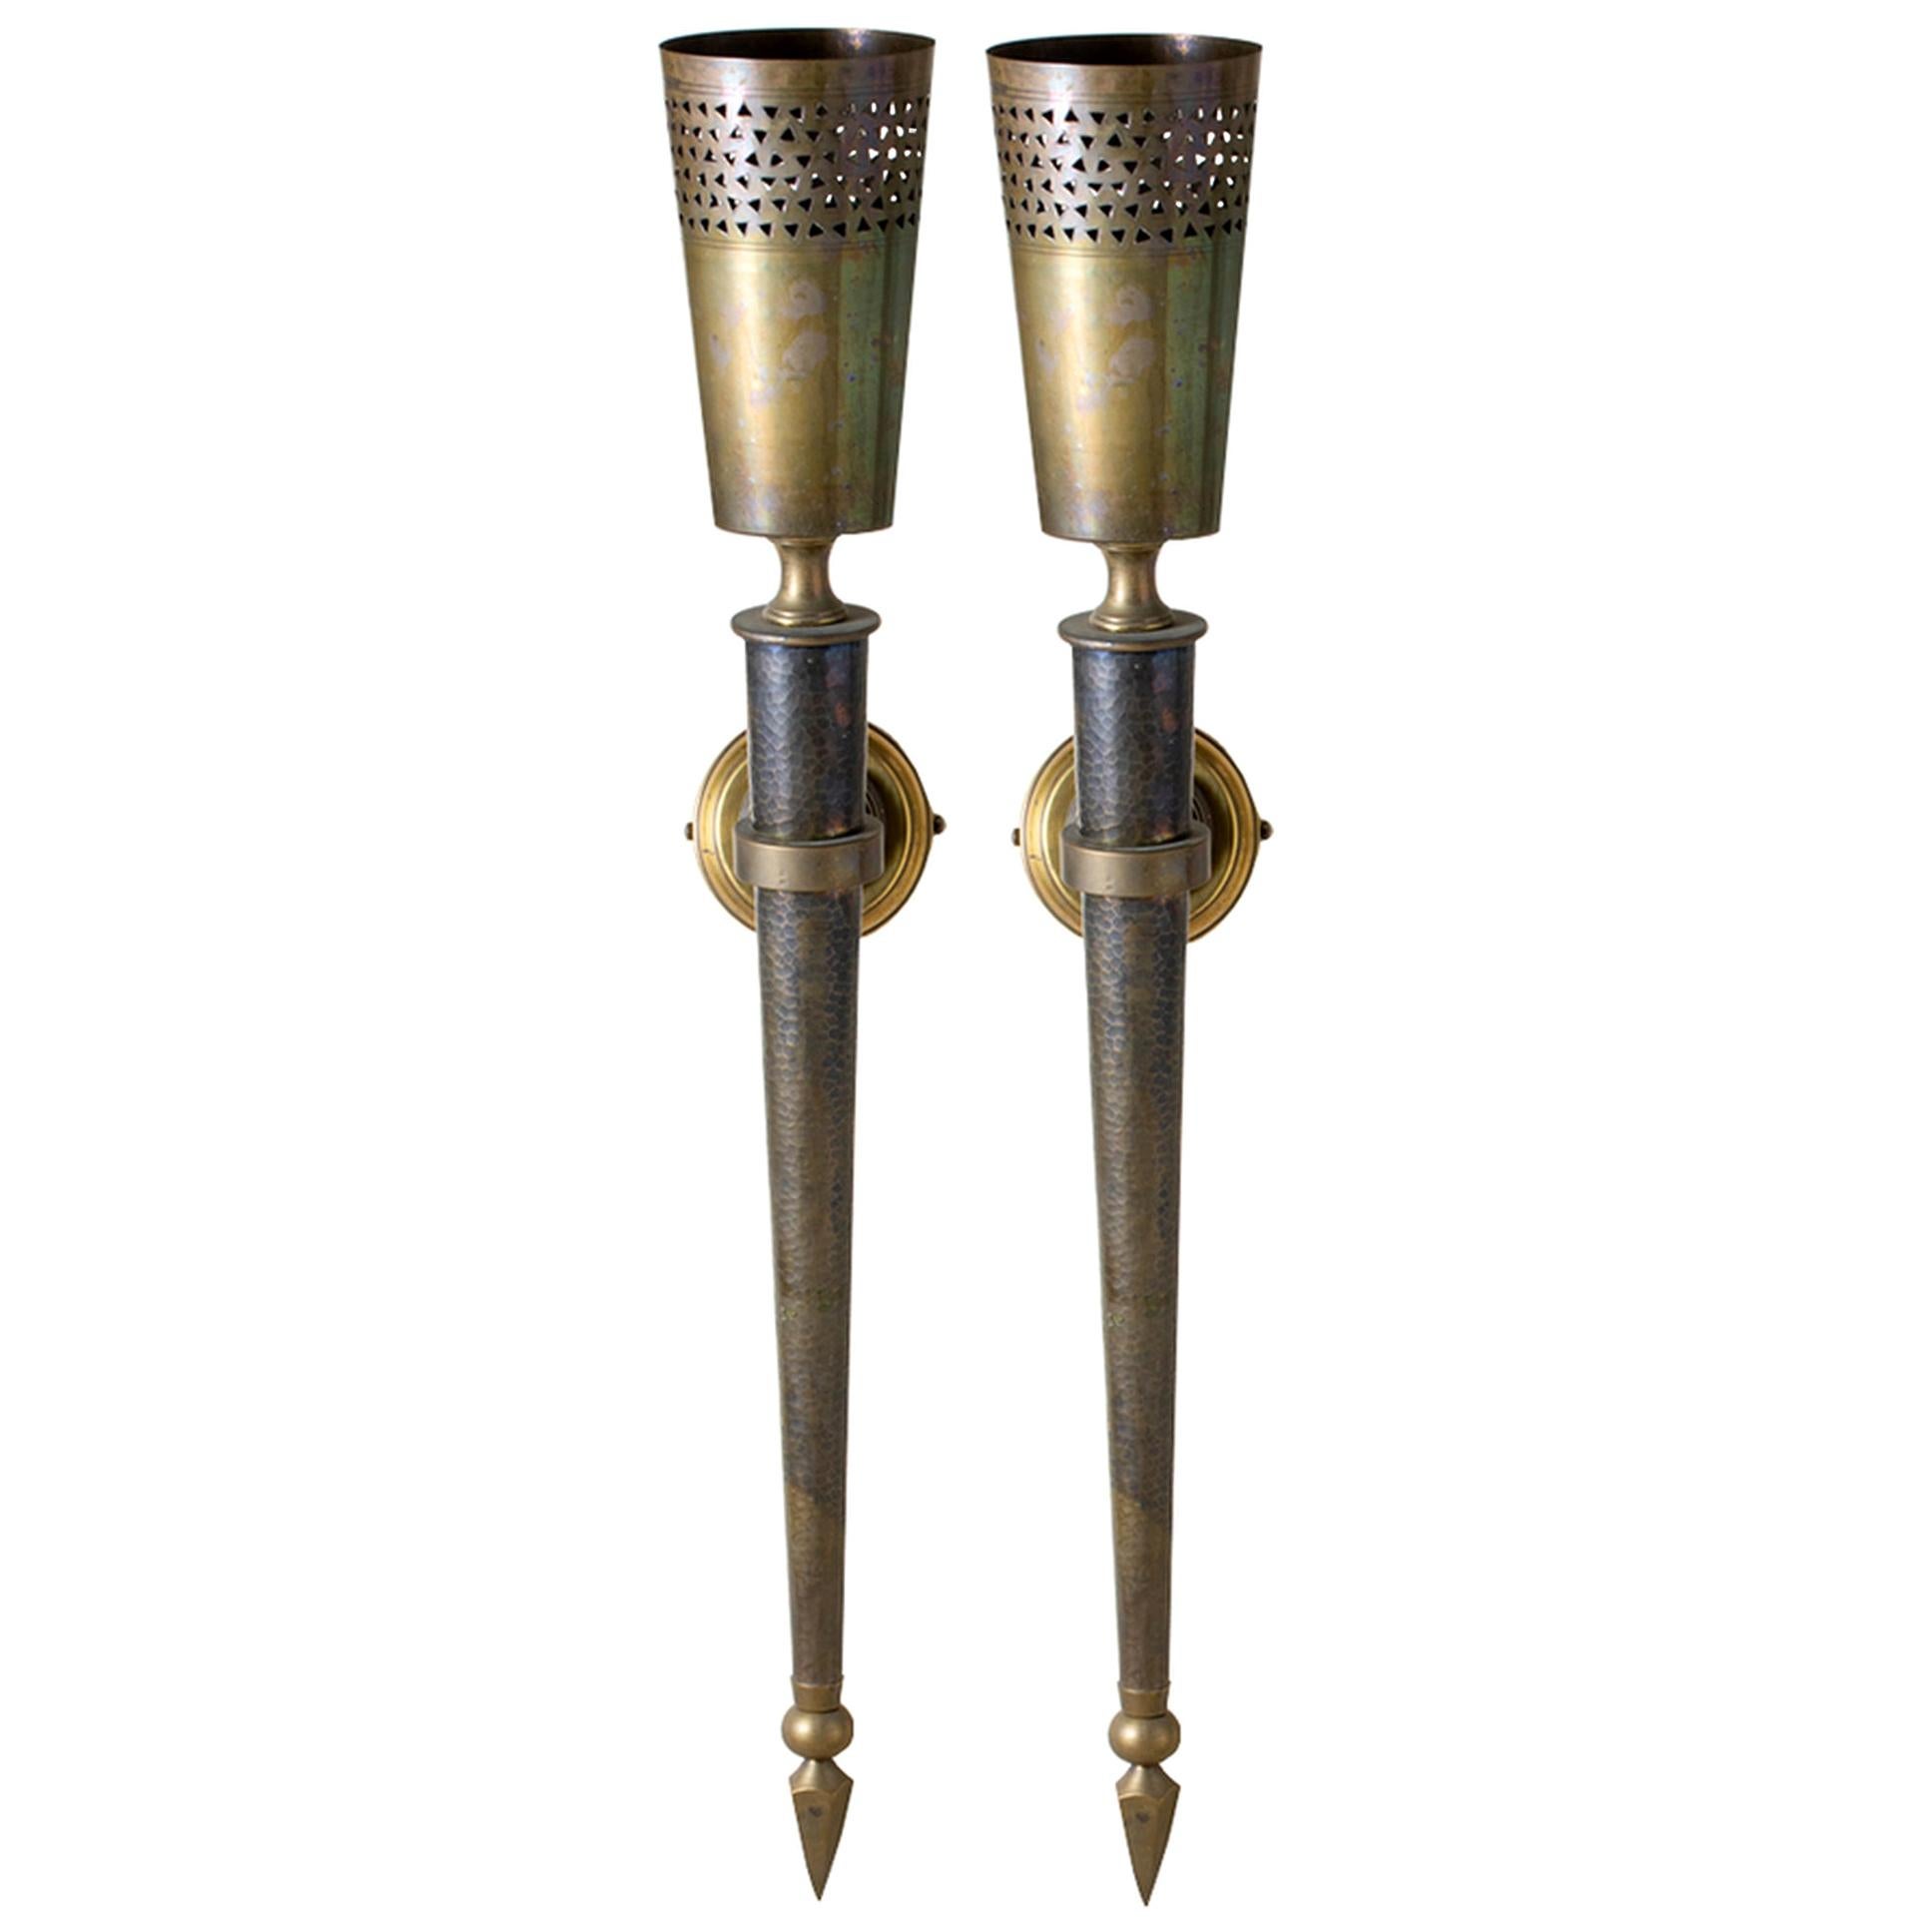 Pair of Torches/Sconces in Oriental Style, circa 1950